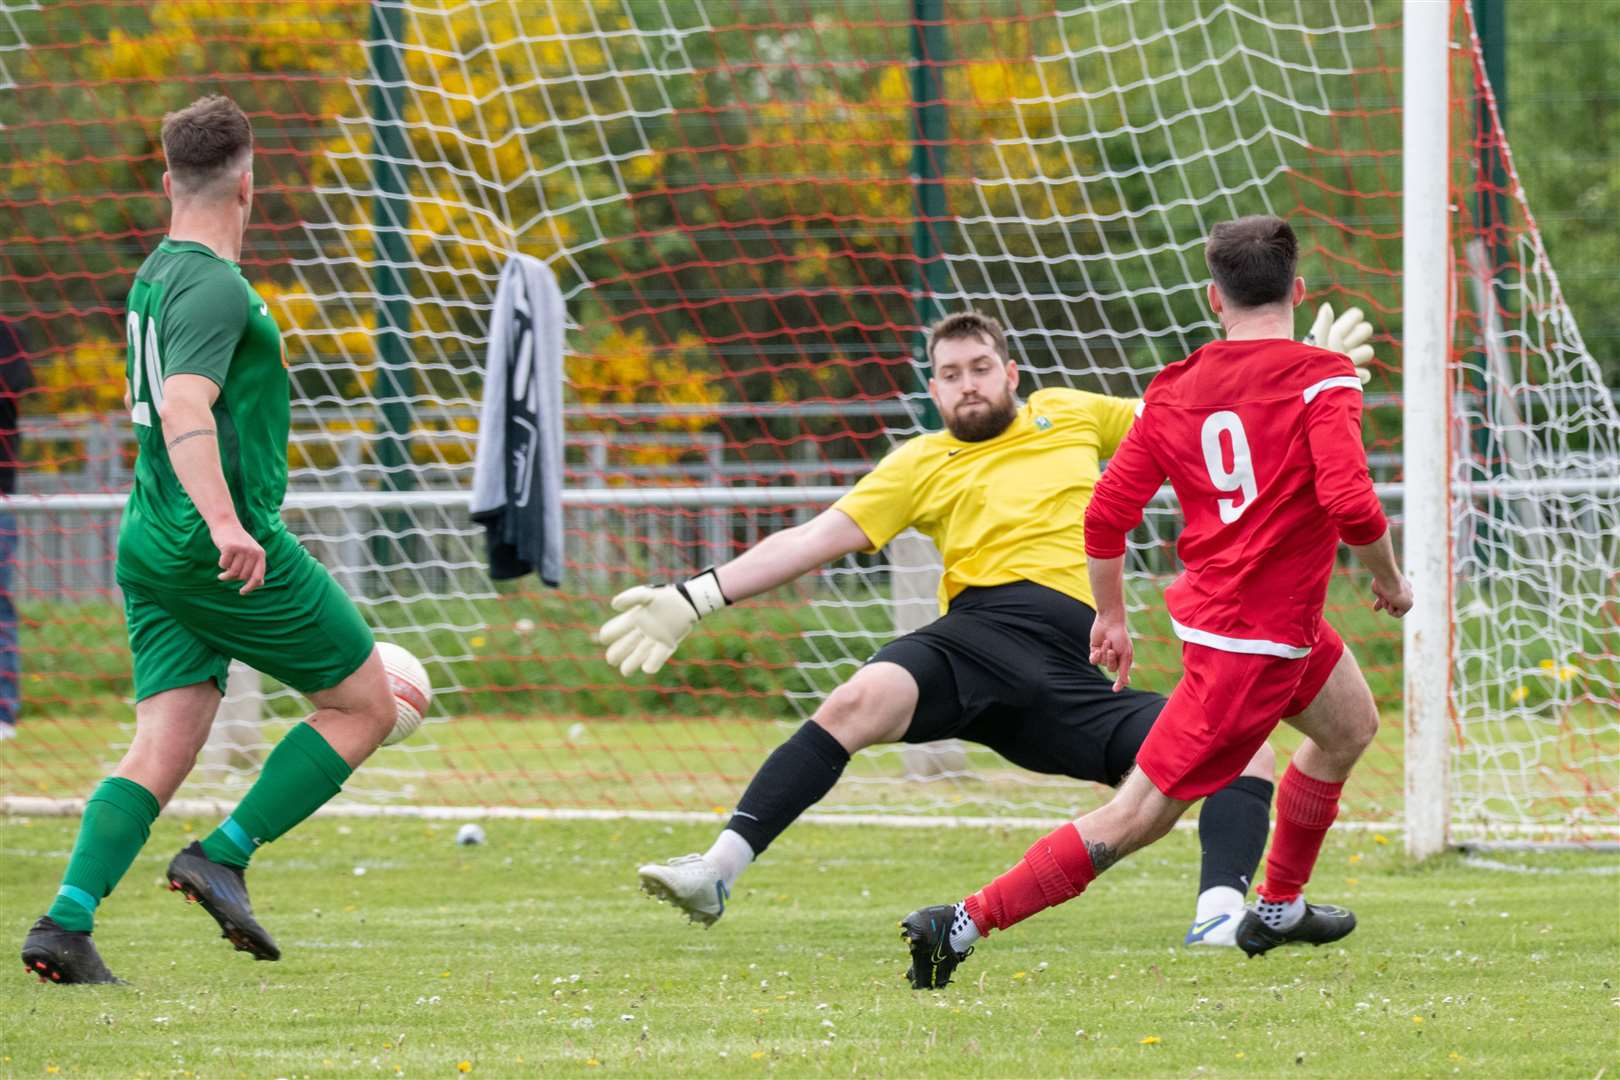 Forres Thistle's Matthew Fraser scores past Dufftown goalkeeper Stewart Black to make it 1-1 in the first half...Dufftown FC (2) vs Forres Thistle FC (2) - Dufftown FC win 5-3 on penalties - Elginshire Cup Final held at Logie Park, Forres 14/05/2022...Picture: Daniel Forsyth..